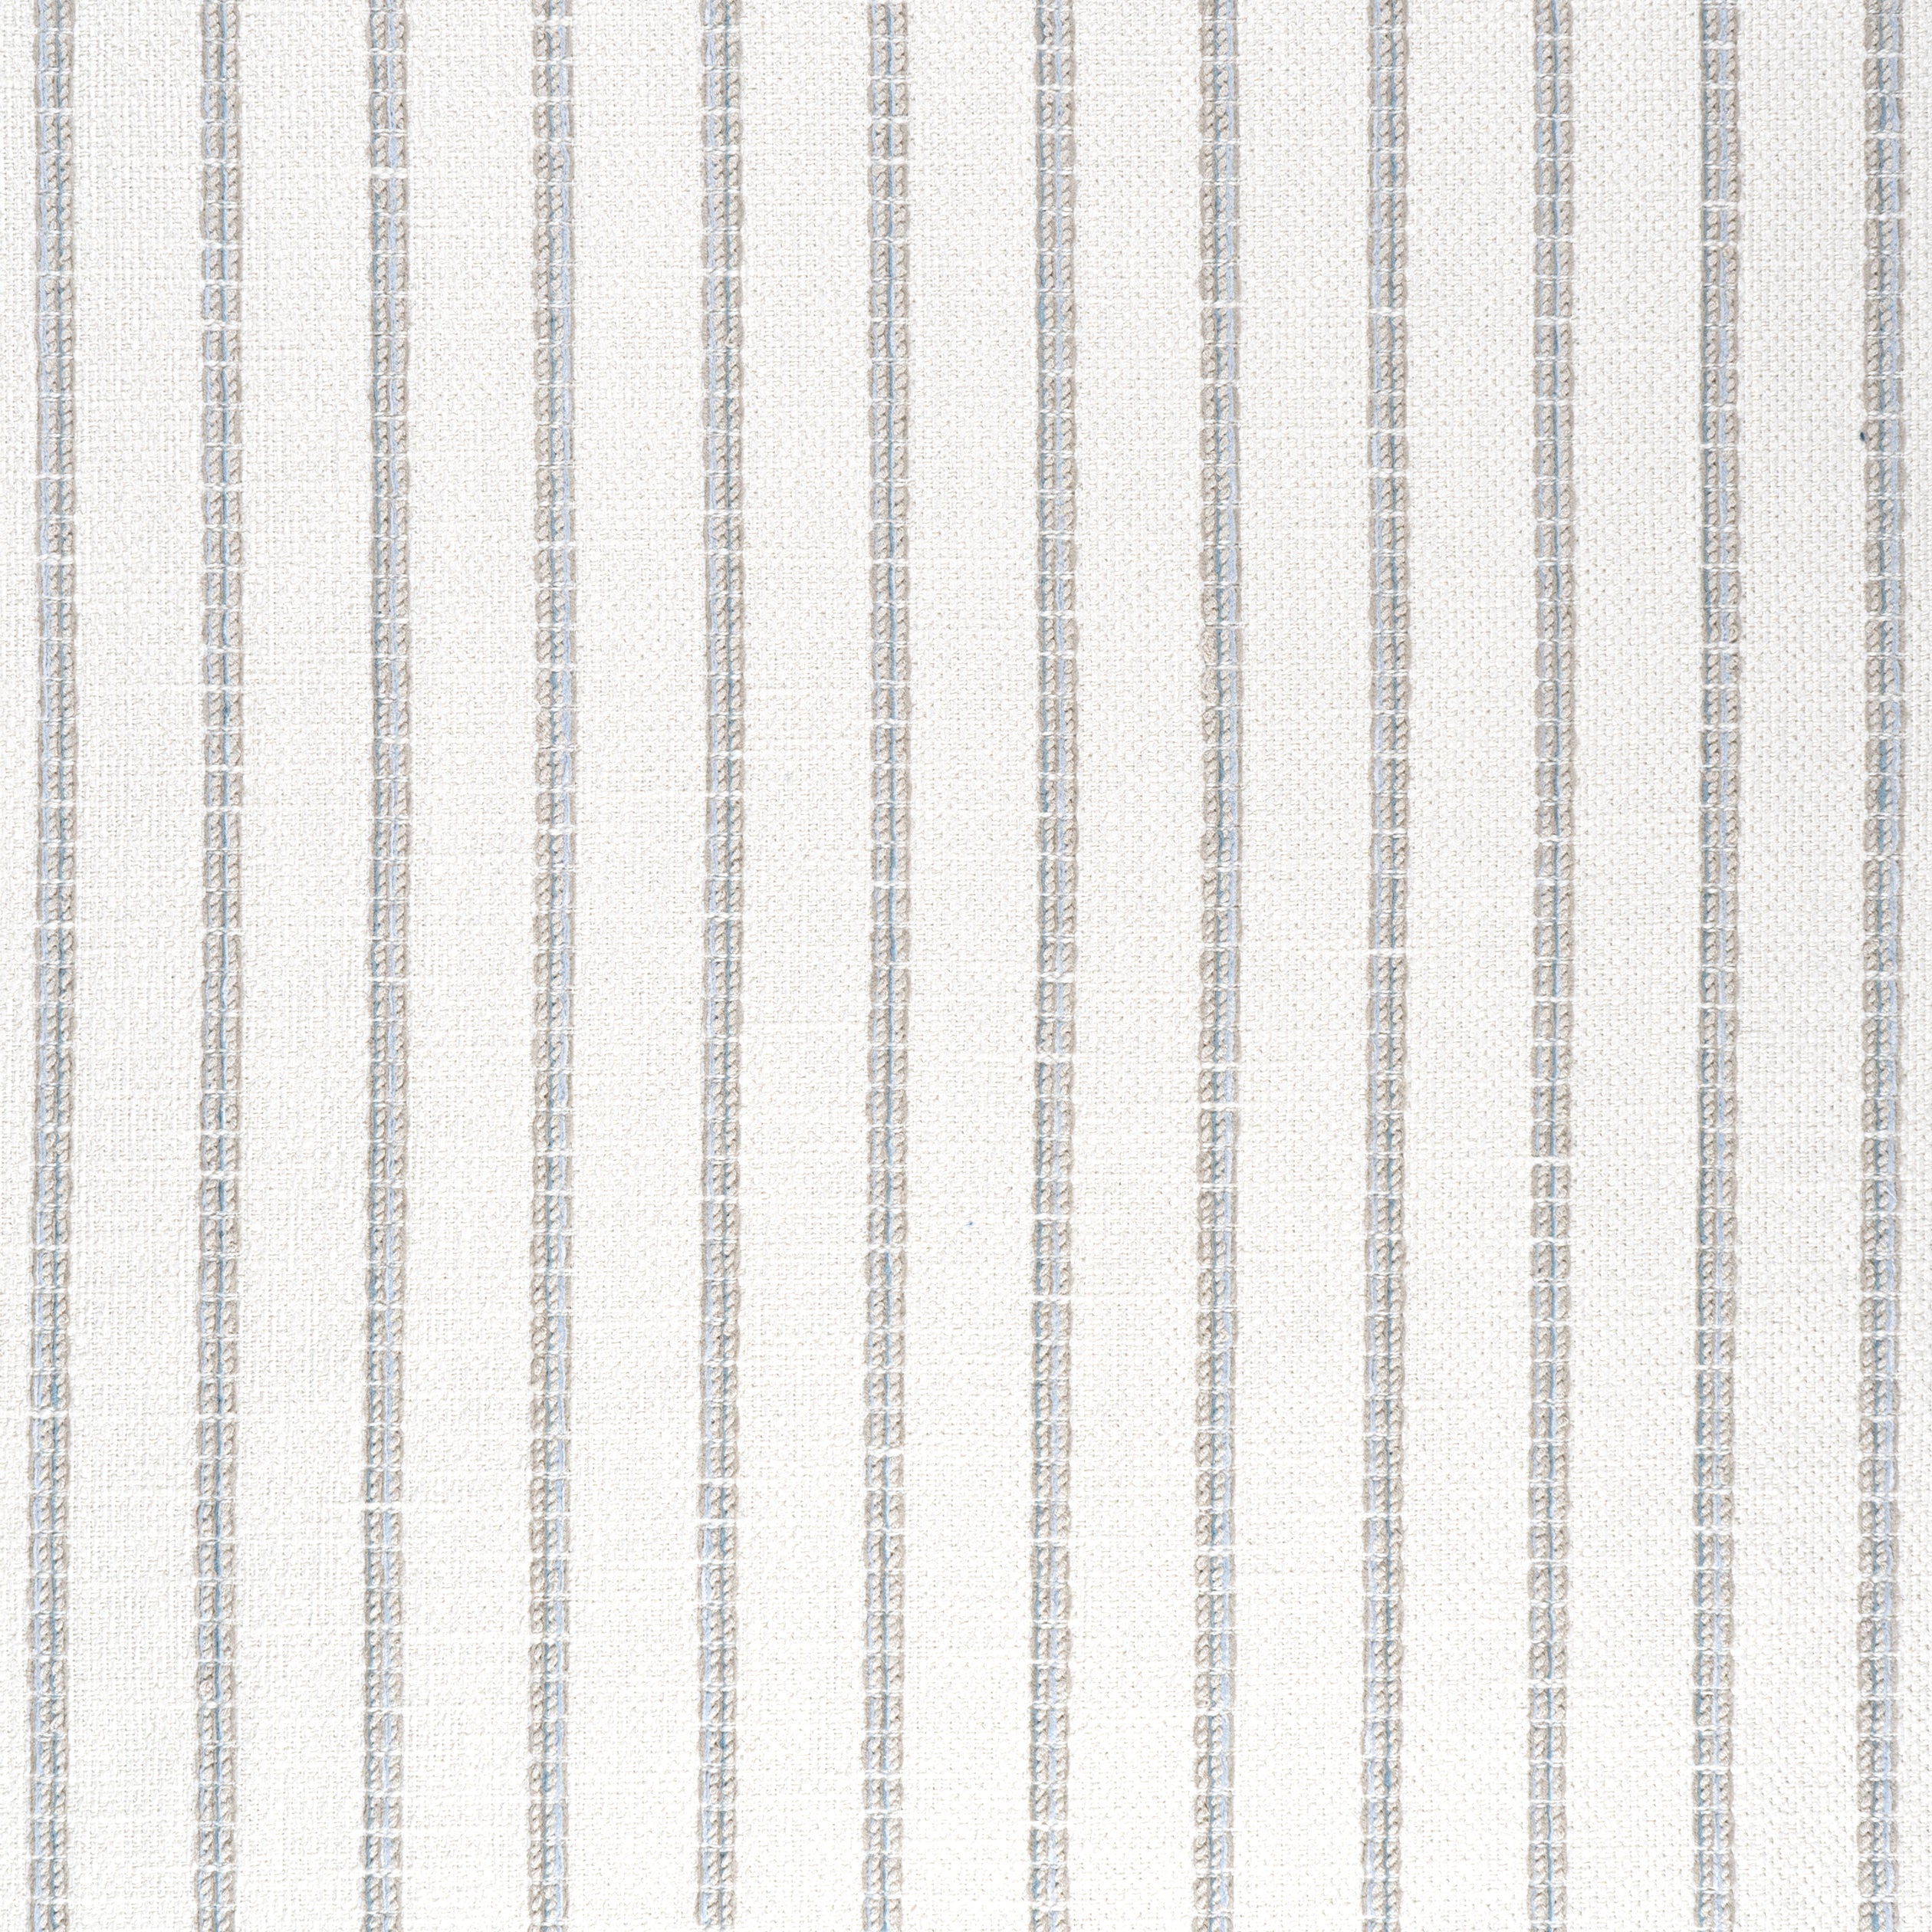 Oak Creek Stripe fabric in glacier color - pattern number W78339 - by Thibaut in the  Sierra collection